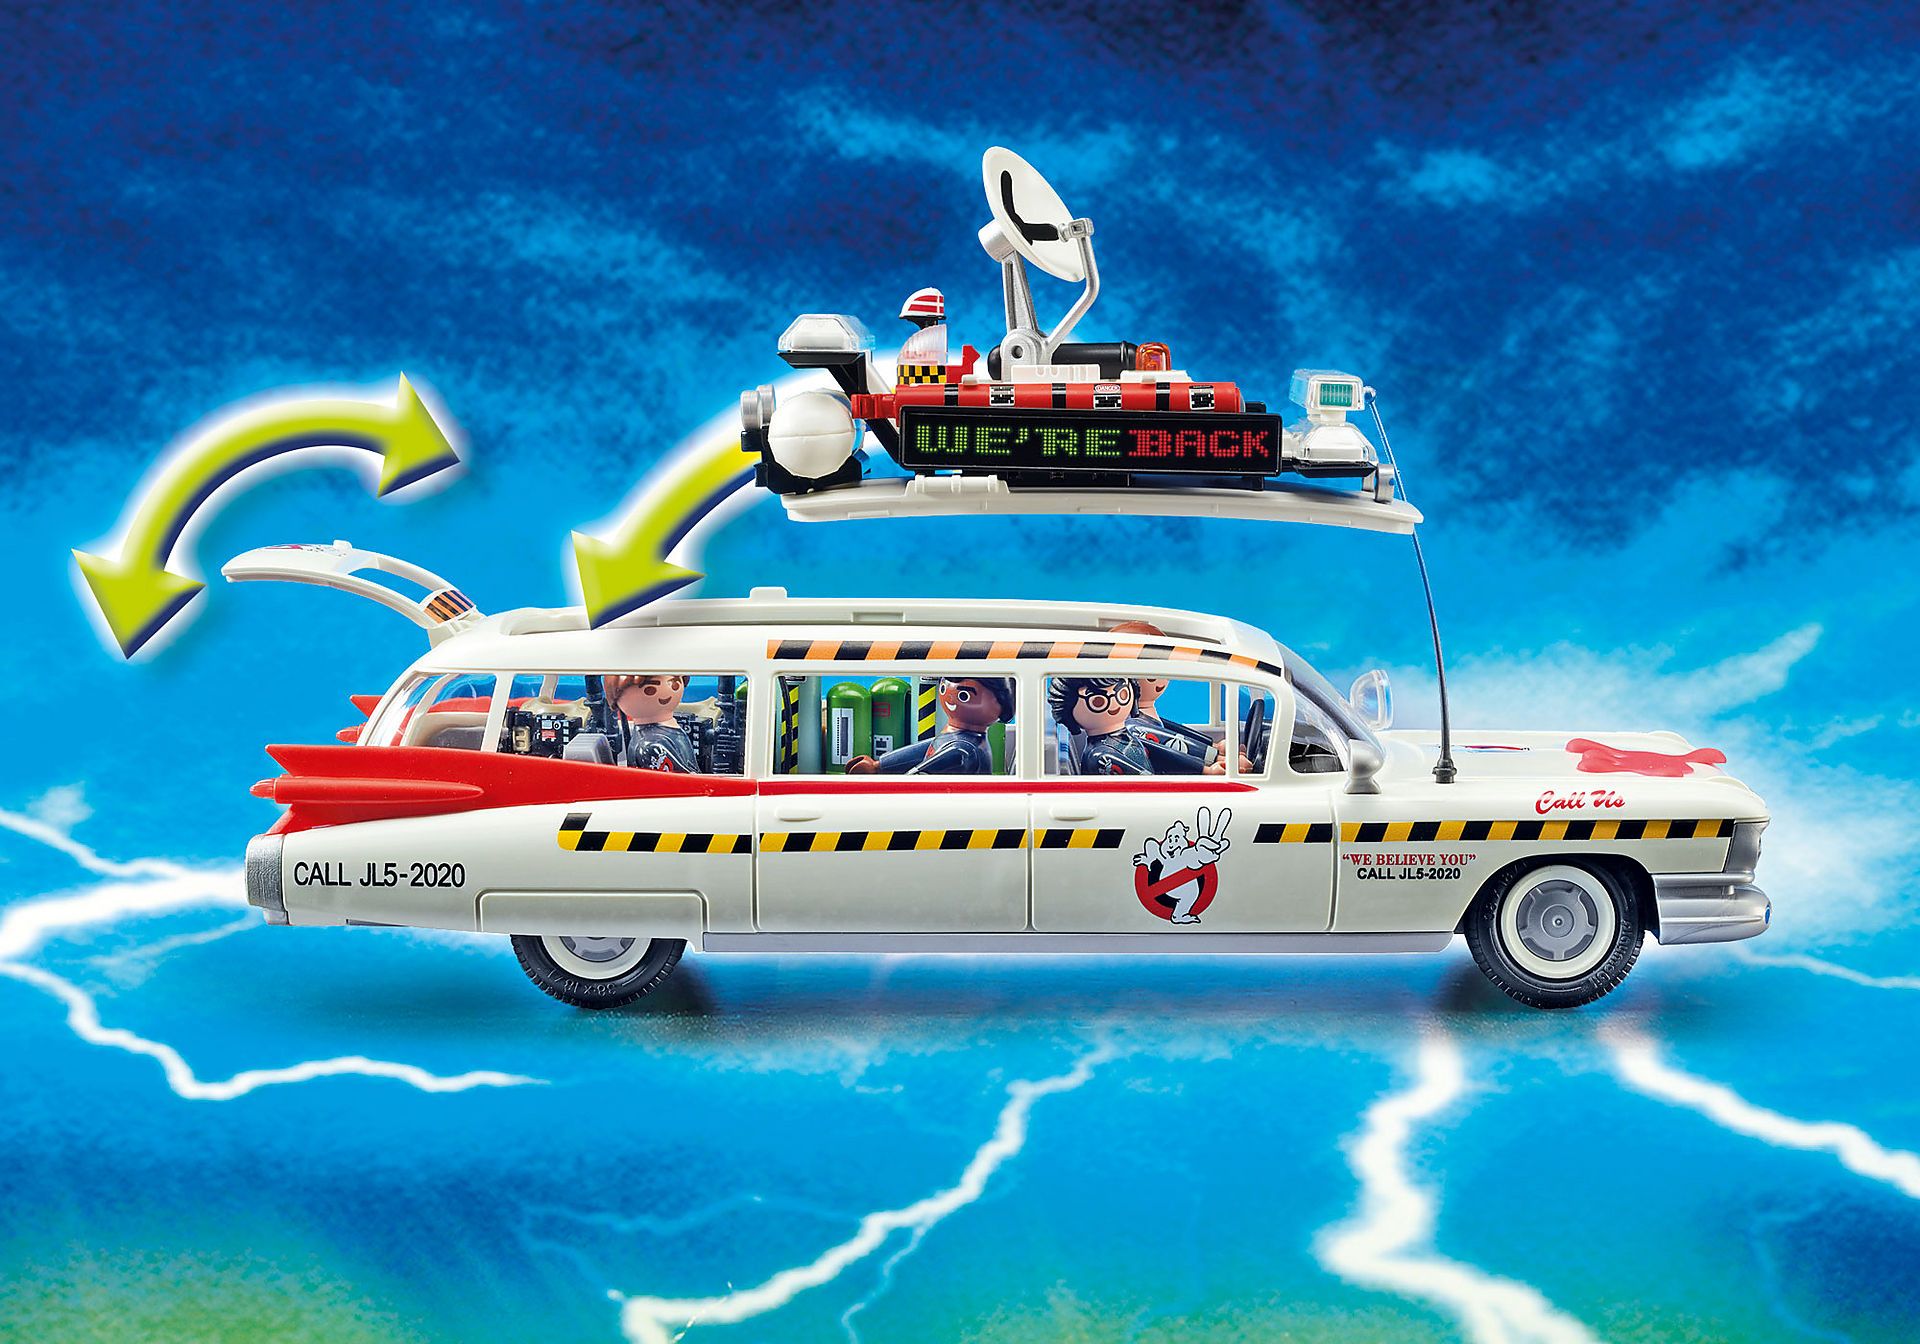 Playmobil Ghostbusters  Ecto-1A